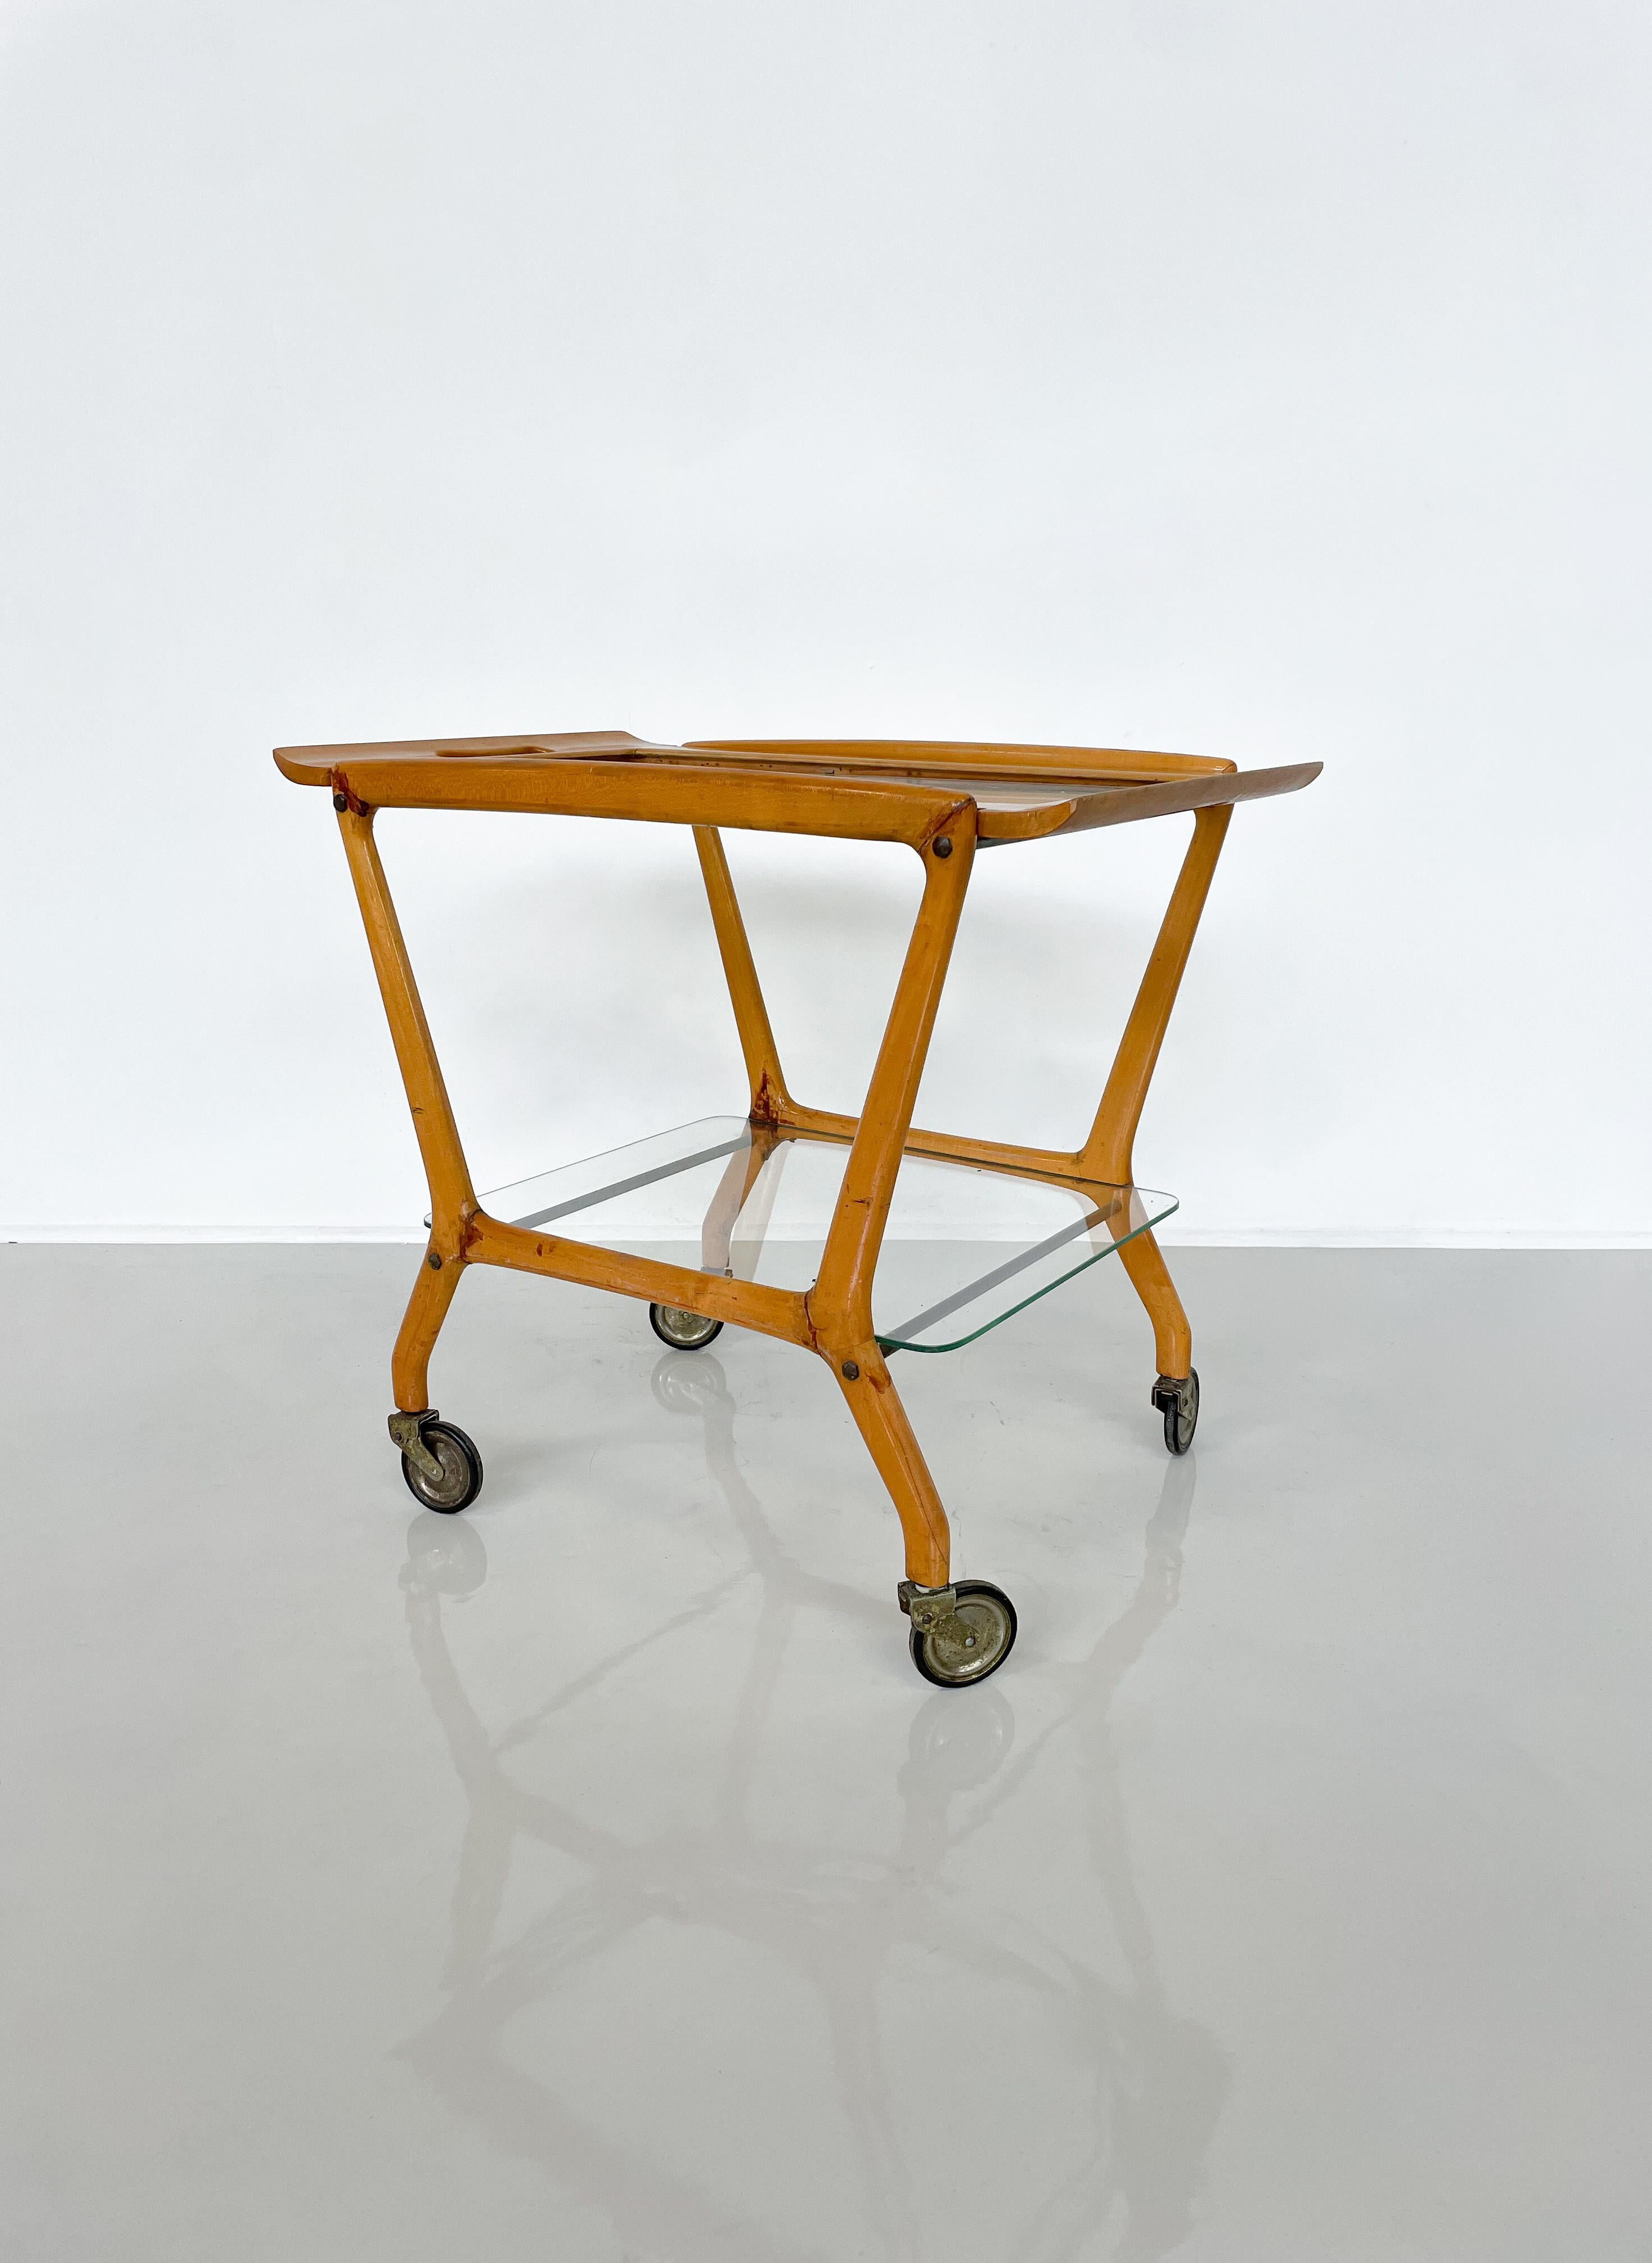 Italian Mid-Century Modern Trolley by Ico Parisi for Angelo de Baggis, Italy, 1950s For Sale